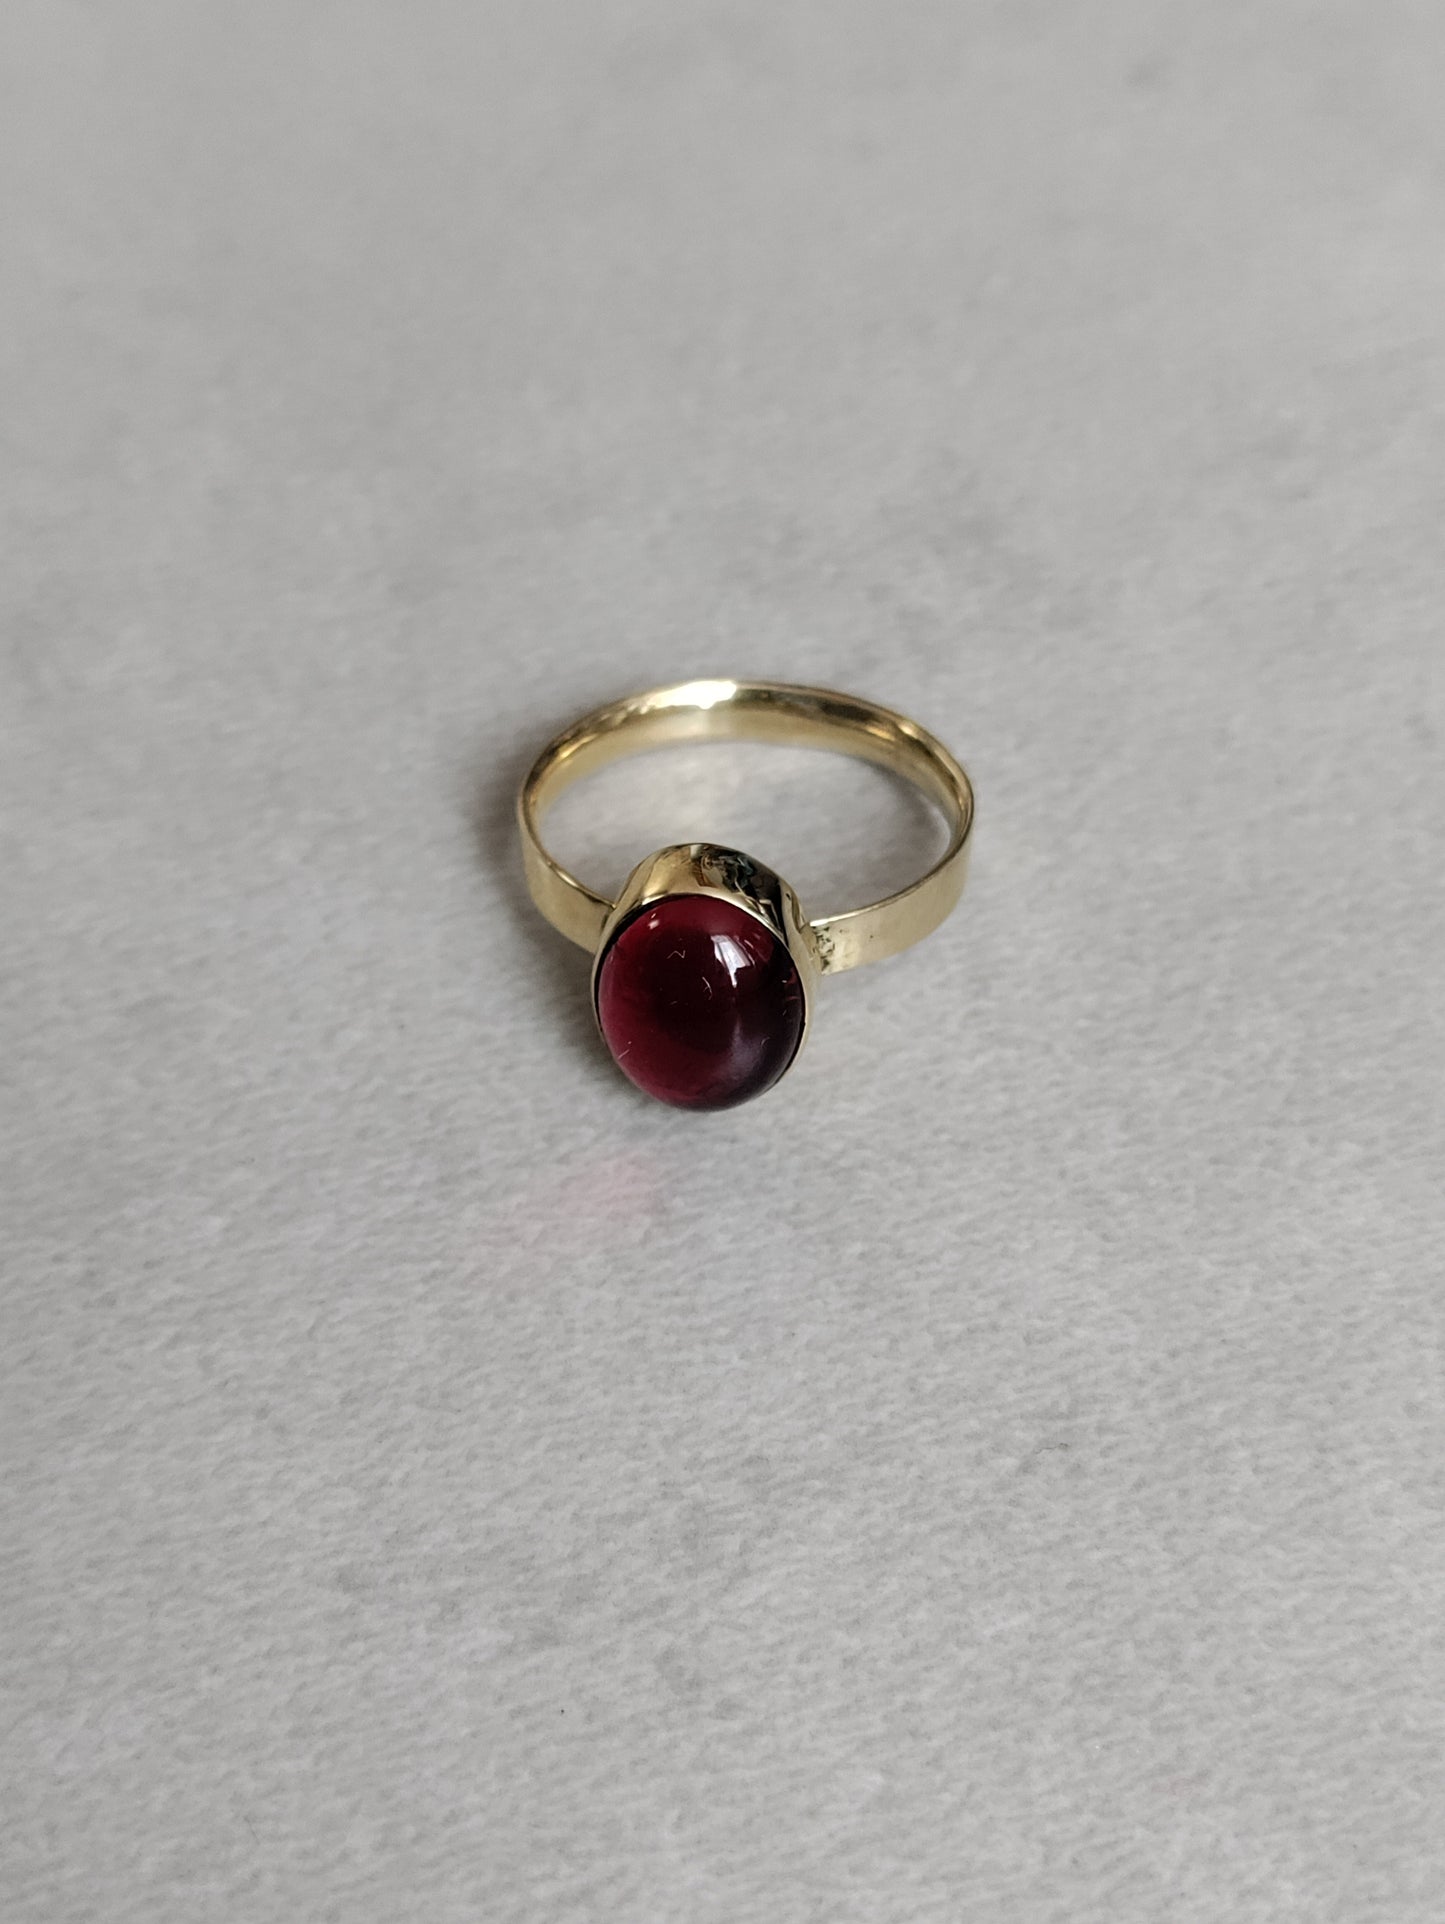 Golden brass ring with Red agate stone LEIA&CO size 5 1/4